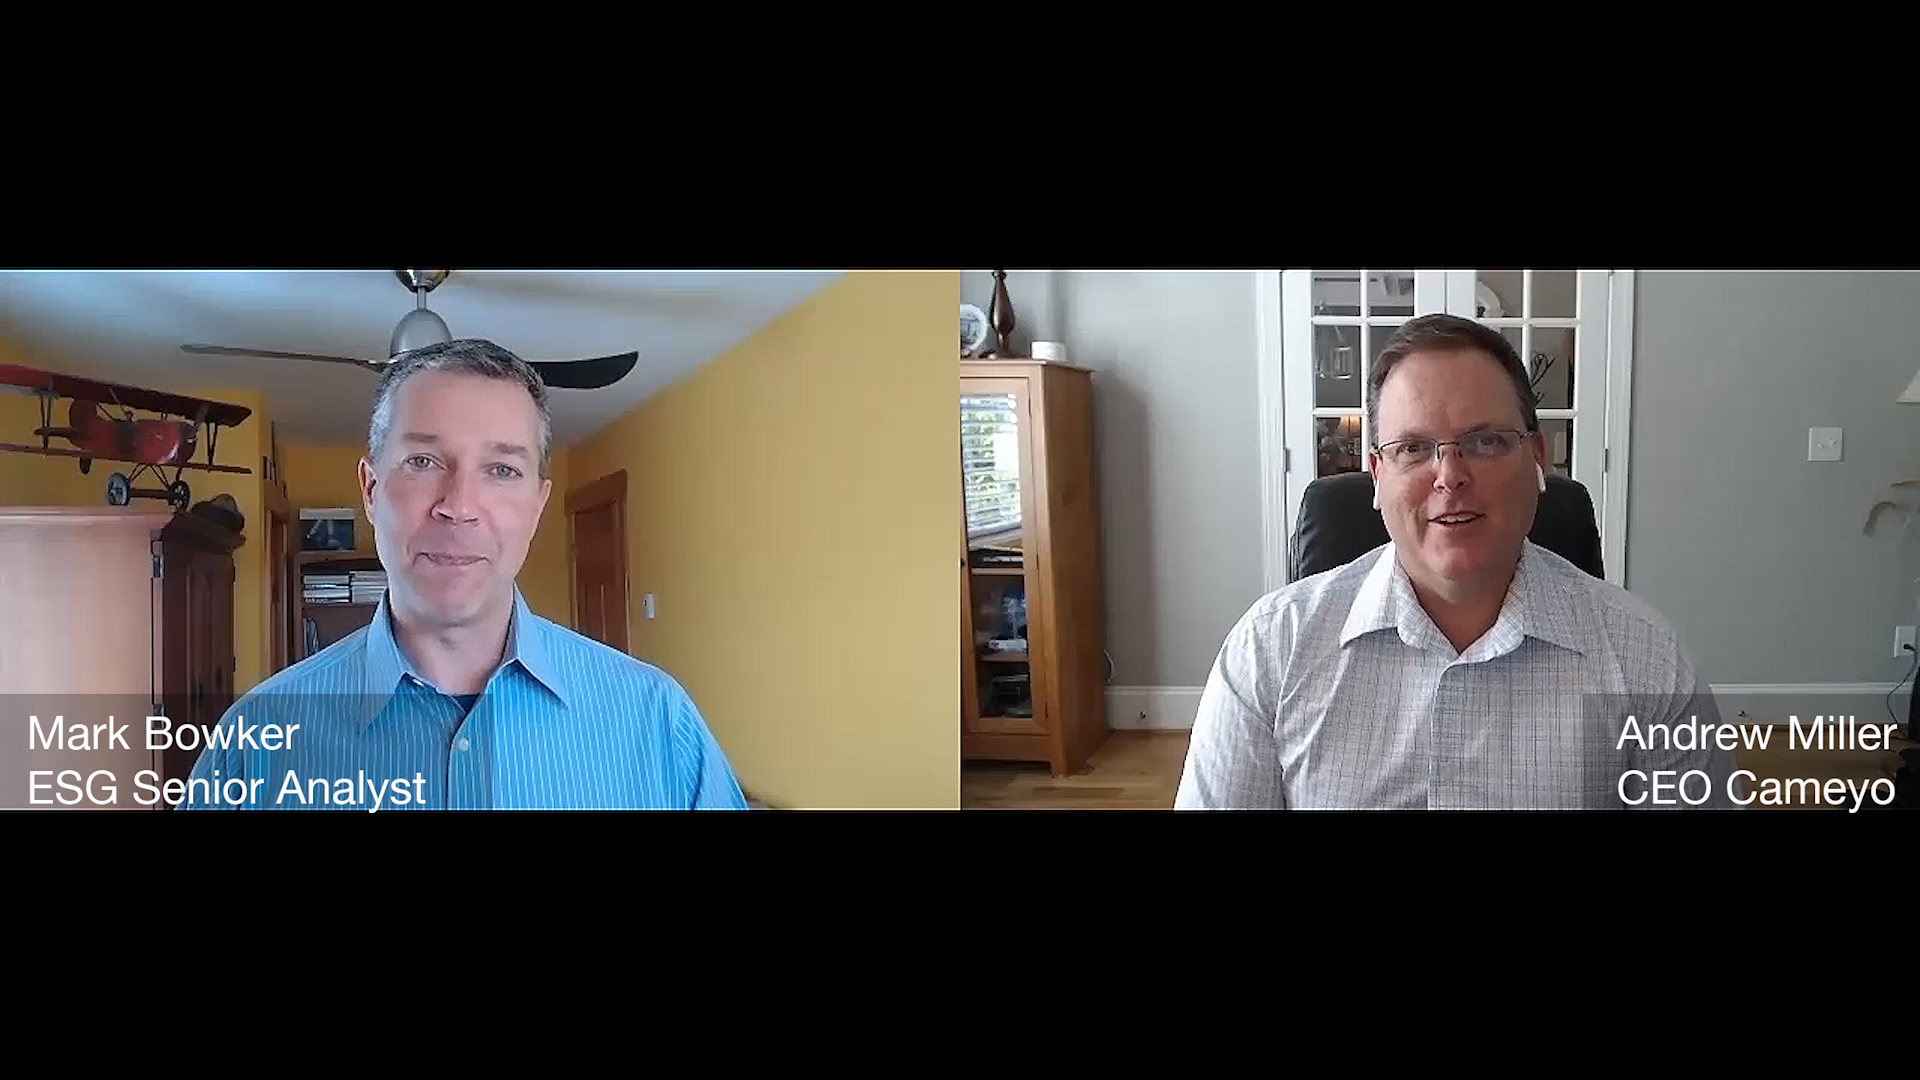 Remote Work Without VPN during the COVID-19 Pandemic? Video with Andrew, CEO at Cameyo